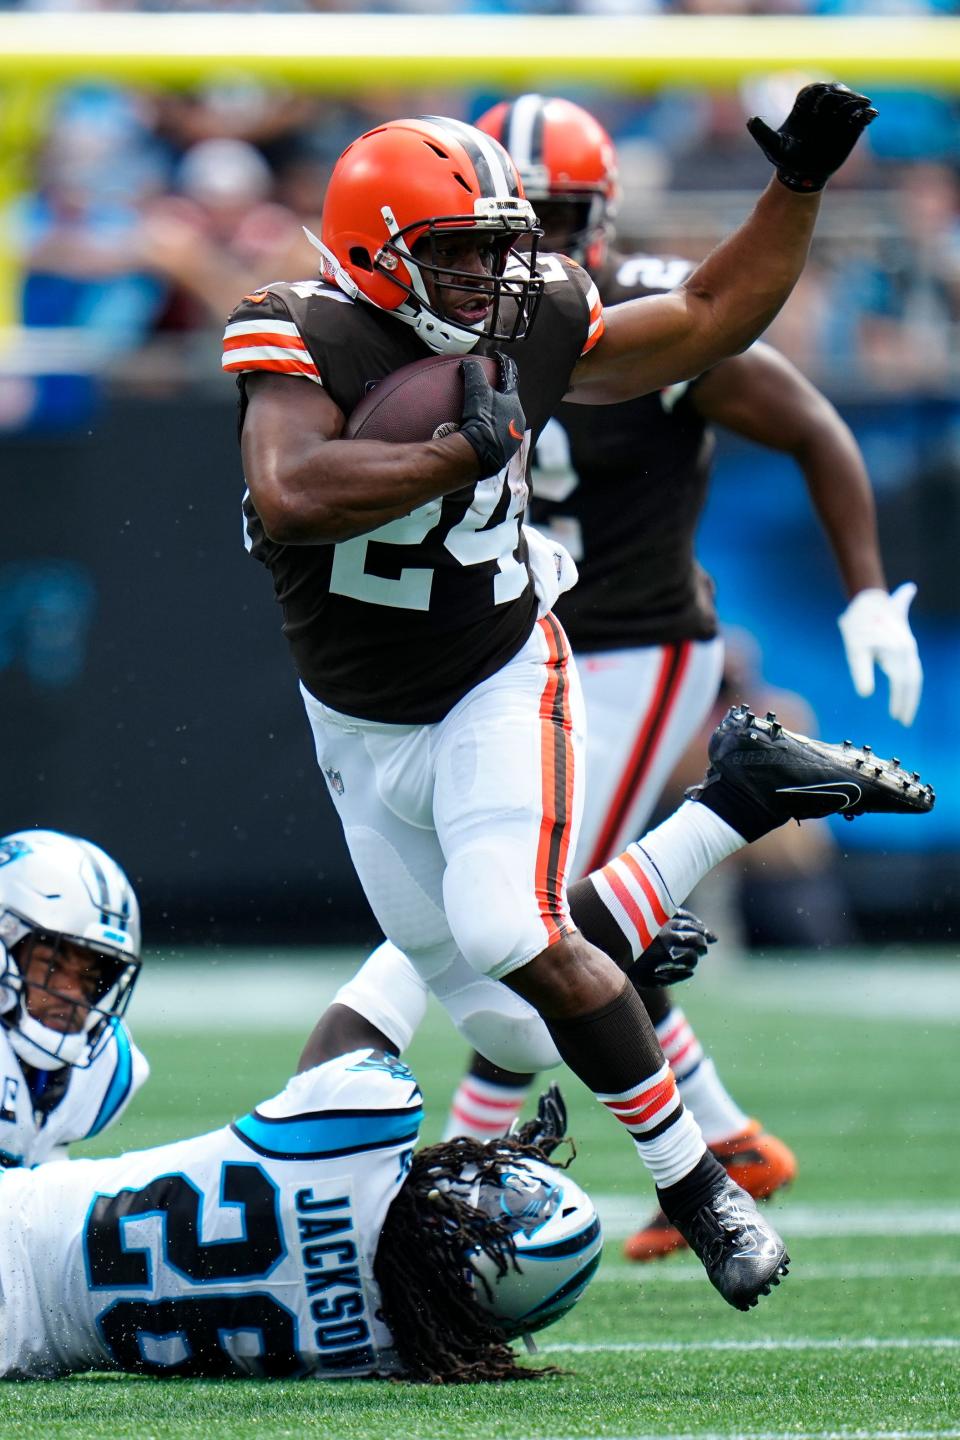 Browns running back Nick Chubb is tackled by Panthers cornerback Keith Taylor Jr. during the first quarter Sunday, Sept. 11, 2022, in Charlotte, N.C.